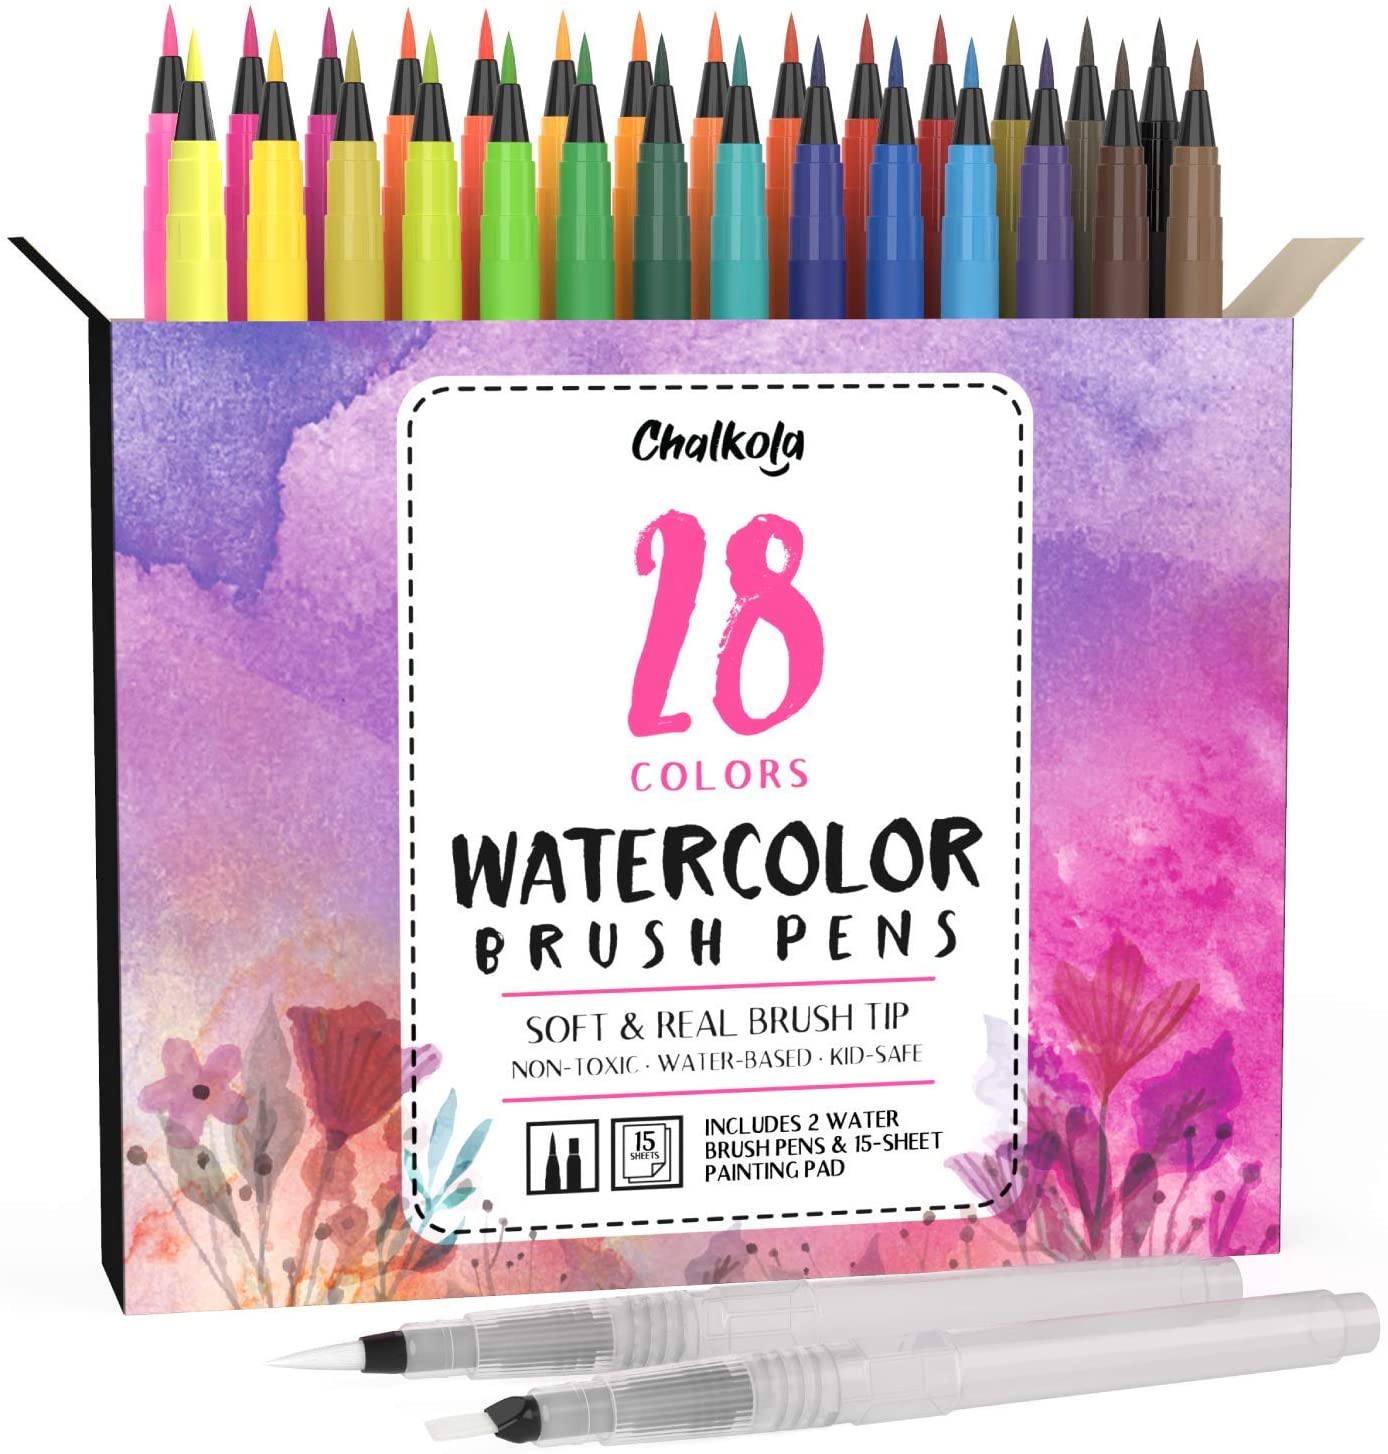 54 Watercolor Pens, 15 Page Pad & Online Video Tutorial Series by